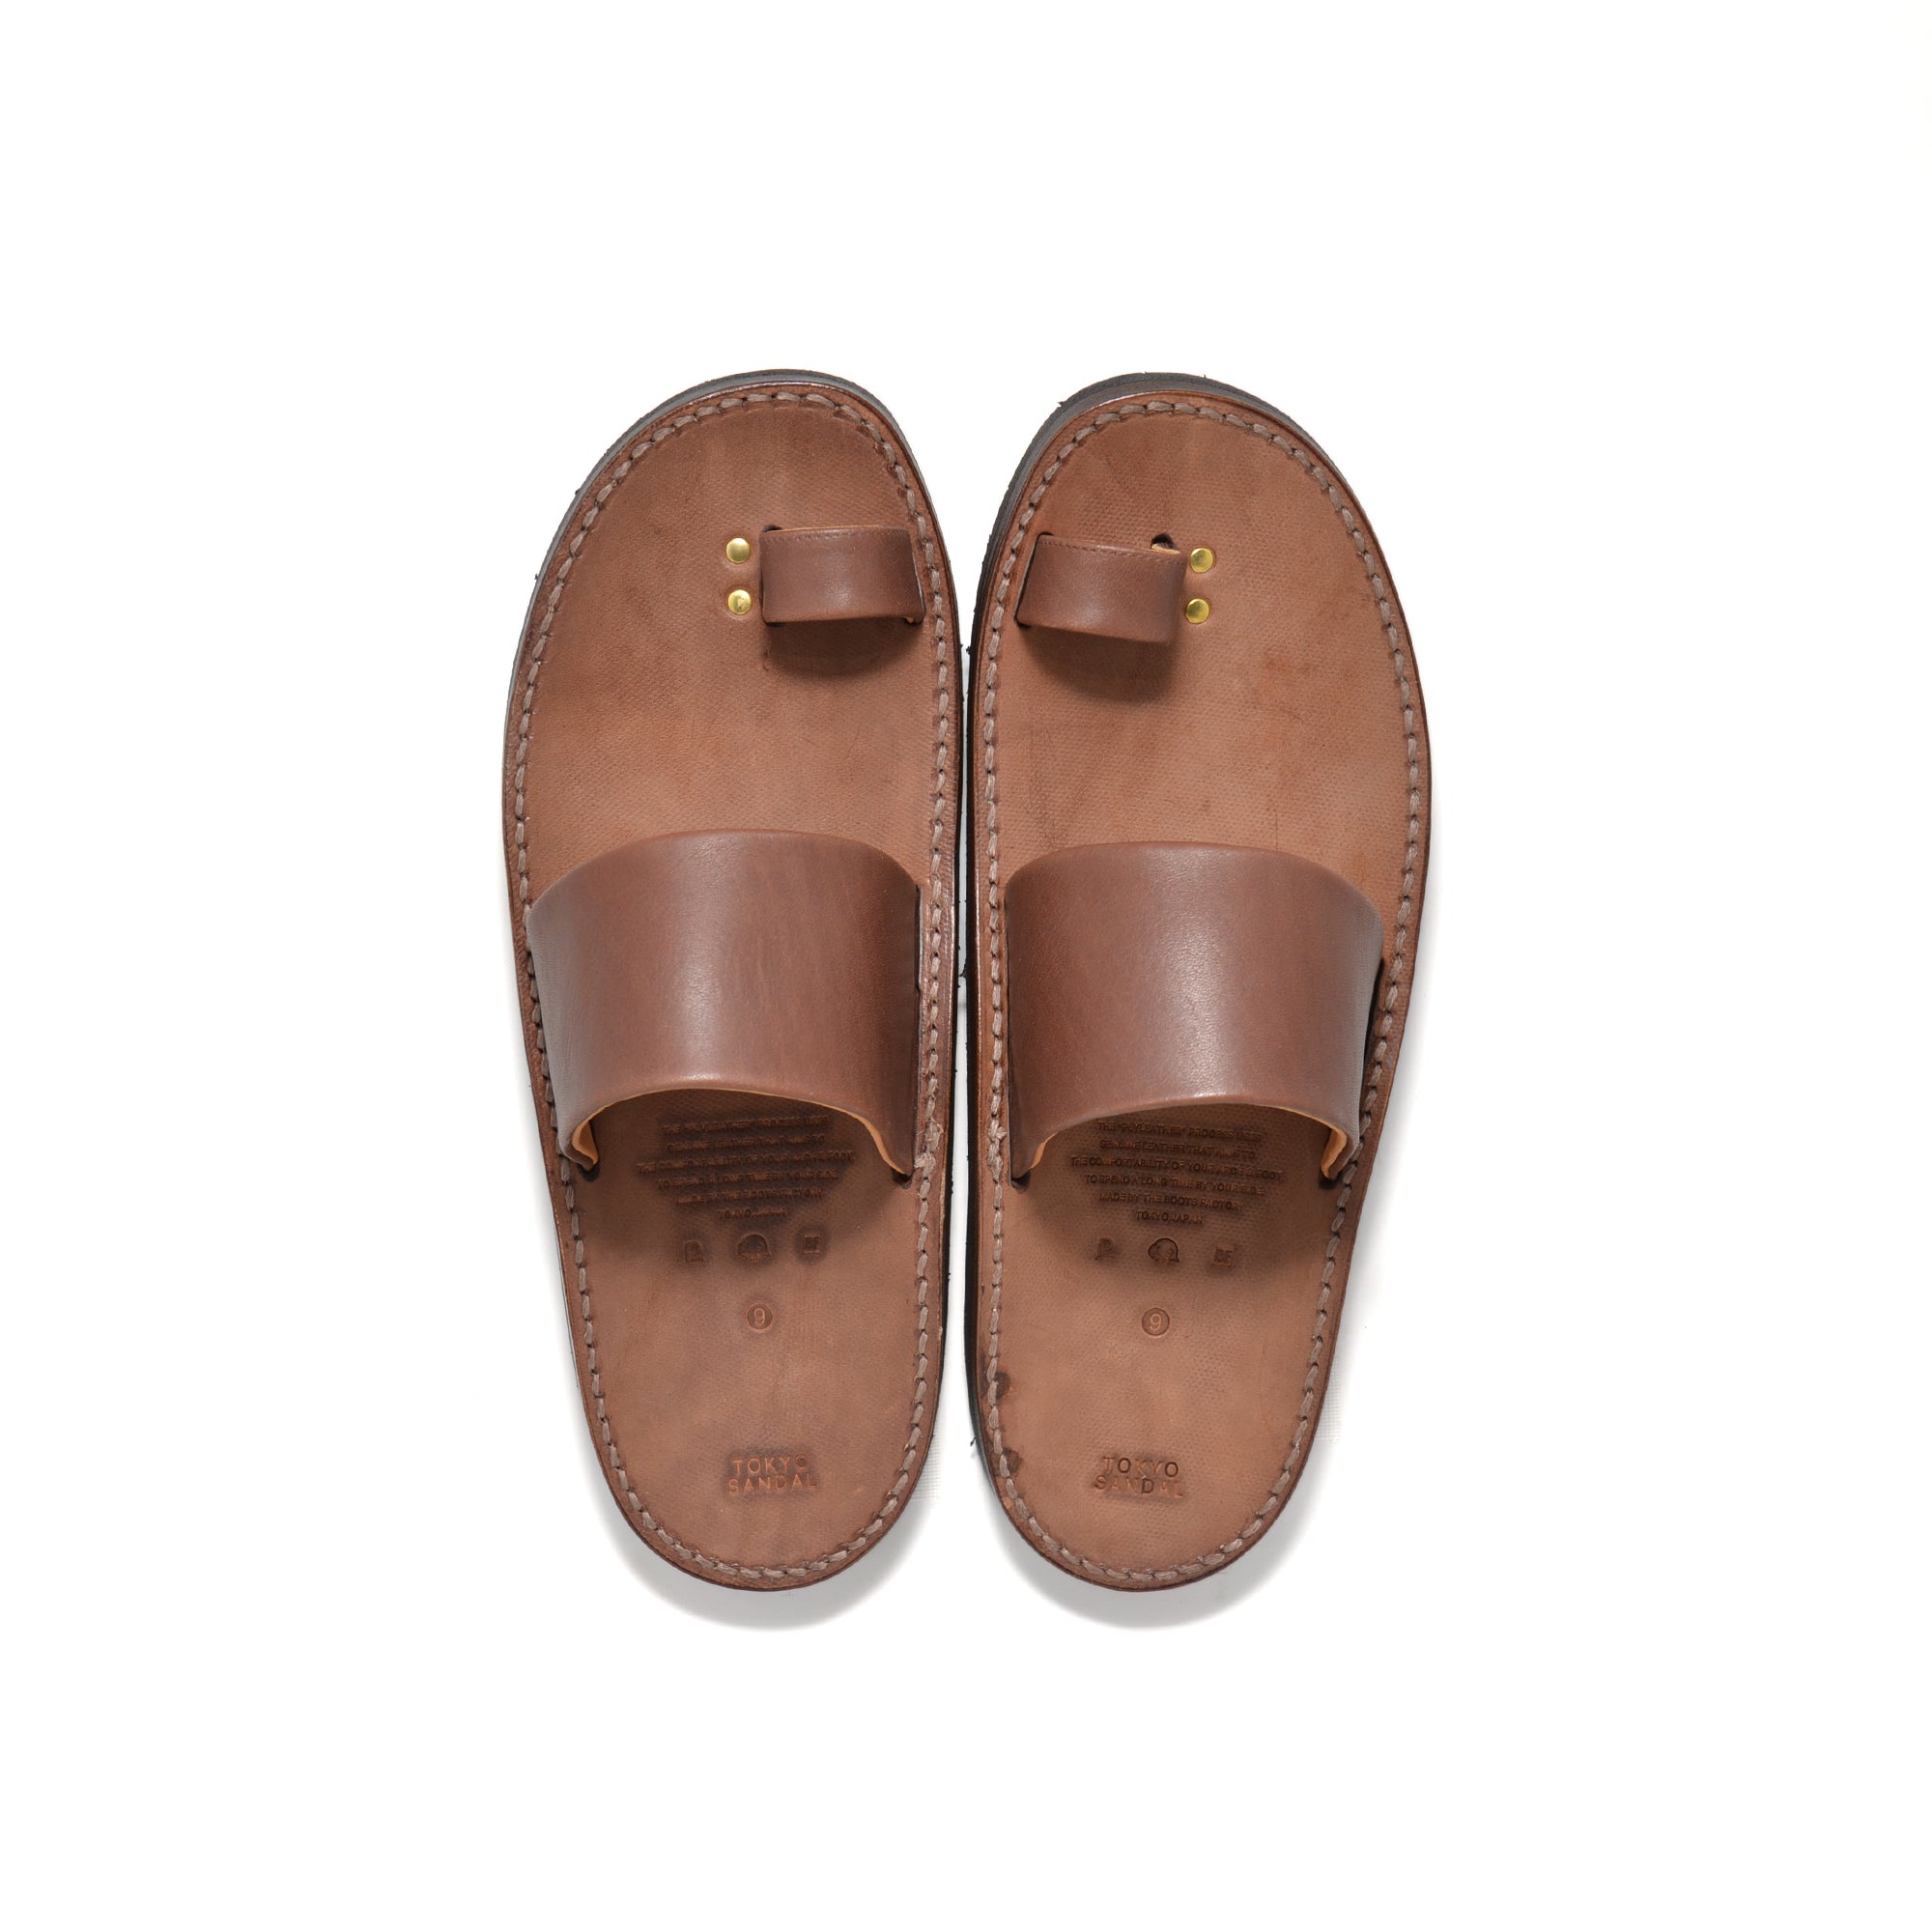 THUMB RING SANDAL (22summer) – THE BOOTS SHOP ONLINE